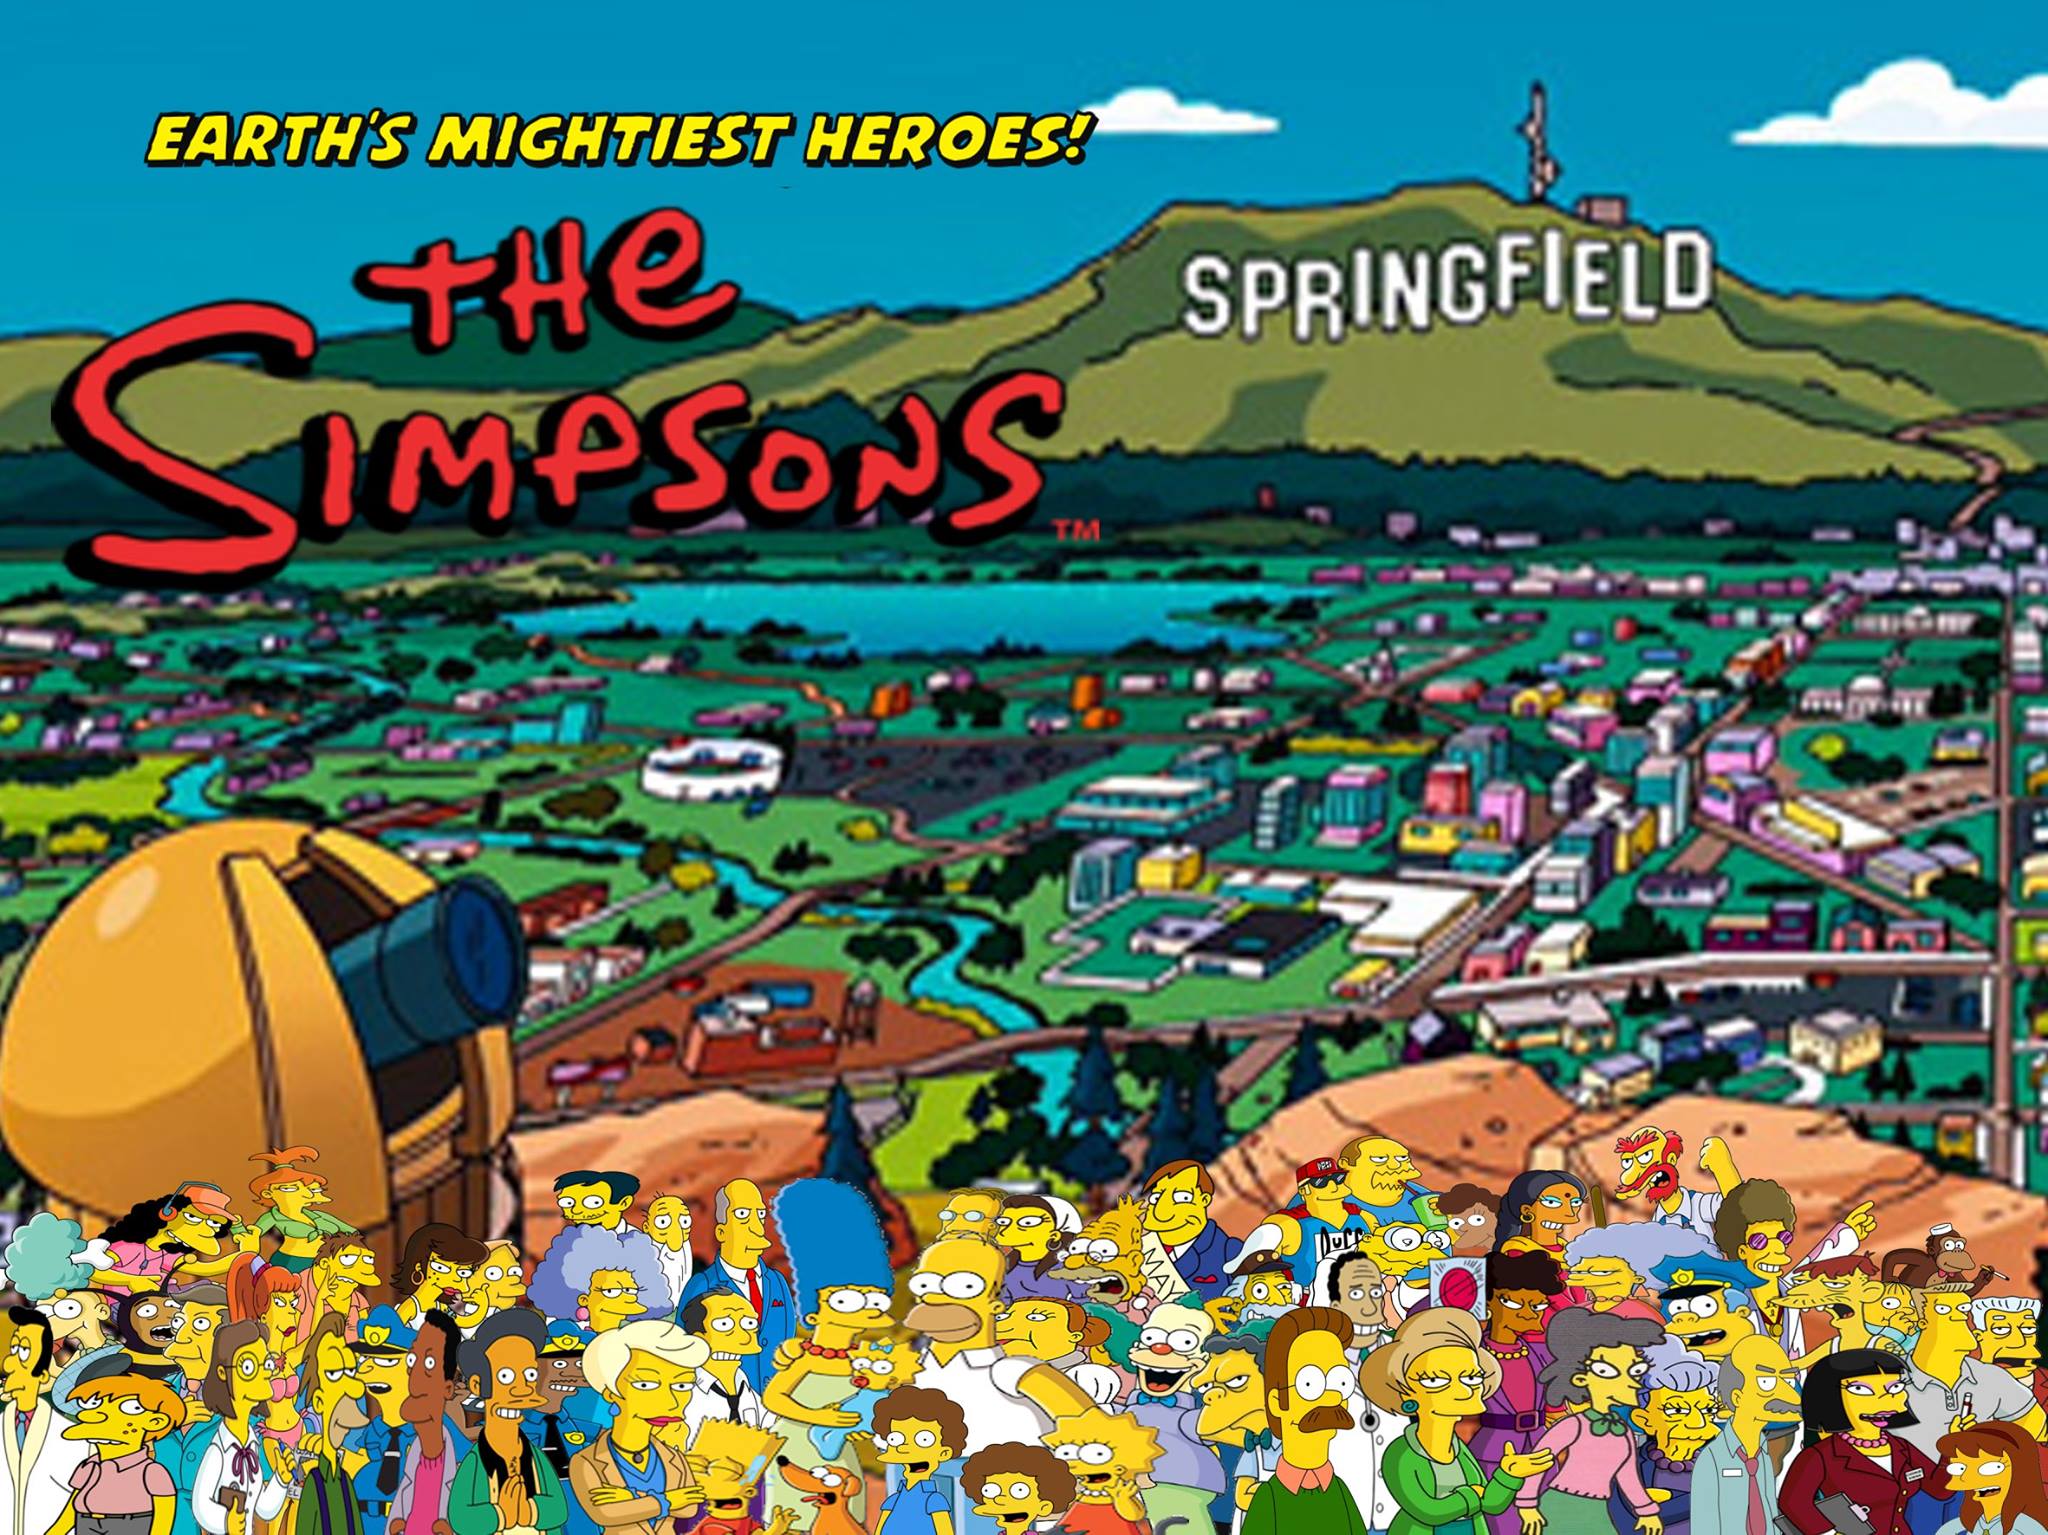 The Simpsons: Earth's Mightiest Heroes: Earth's